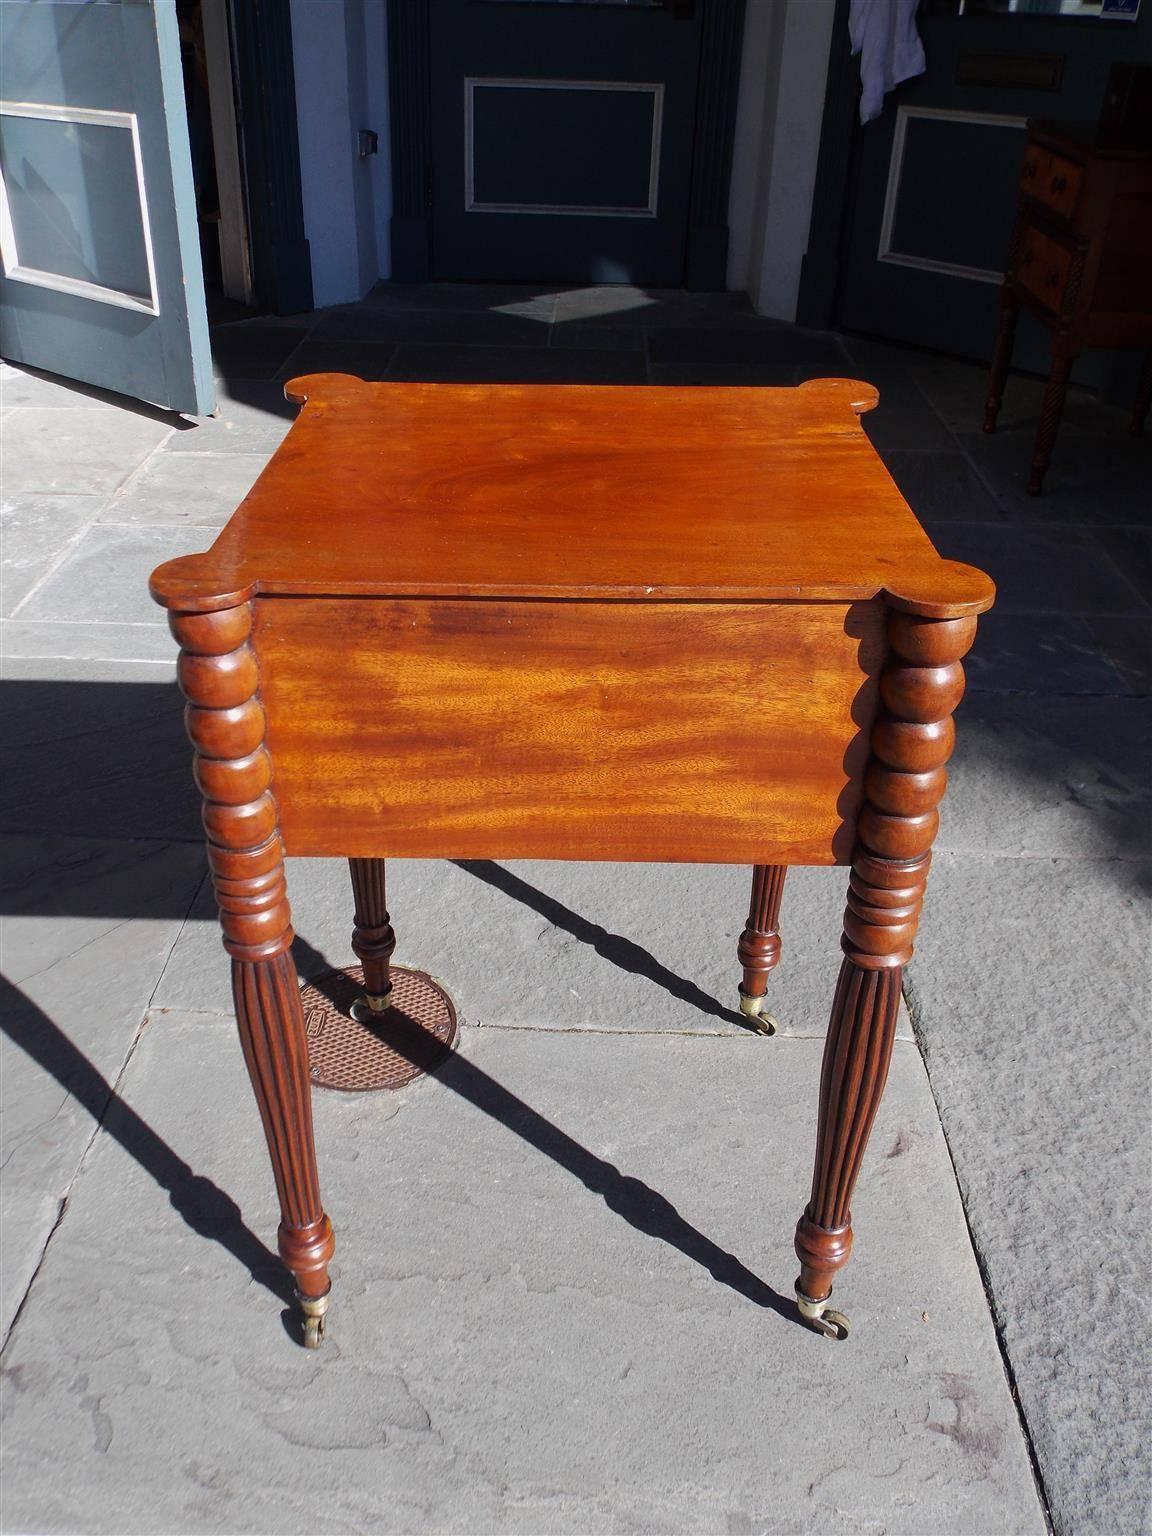 Early 19th Century American Mahogany and Tiger Maple Outset Corner Stand with Reeded Legs, C. 1810